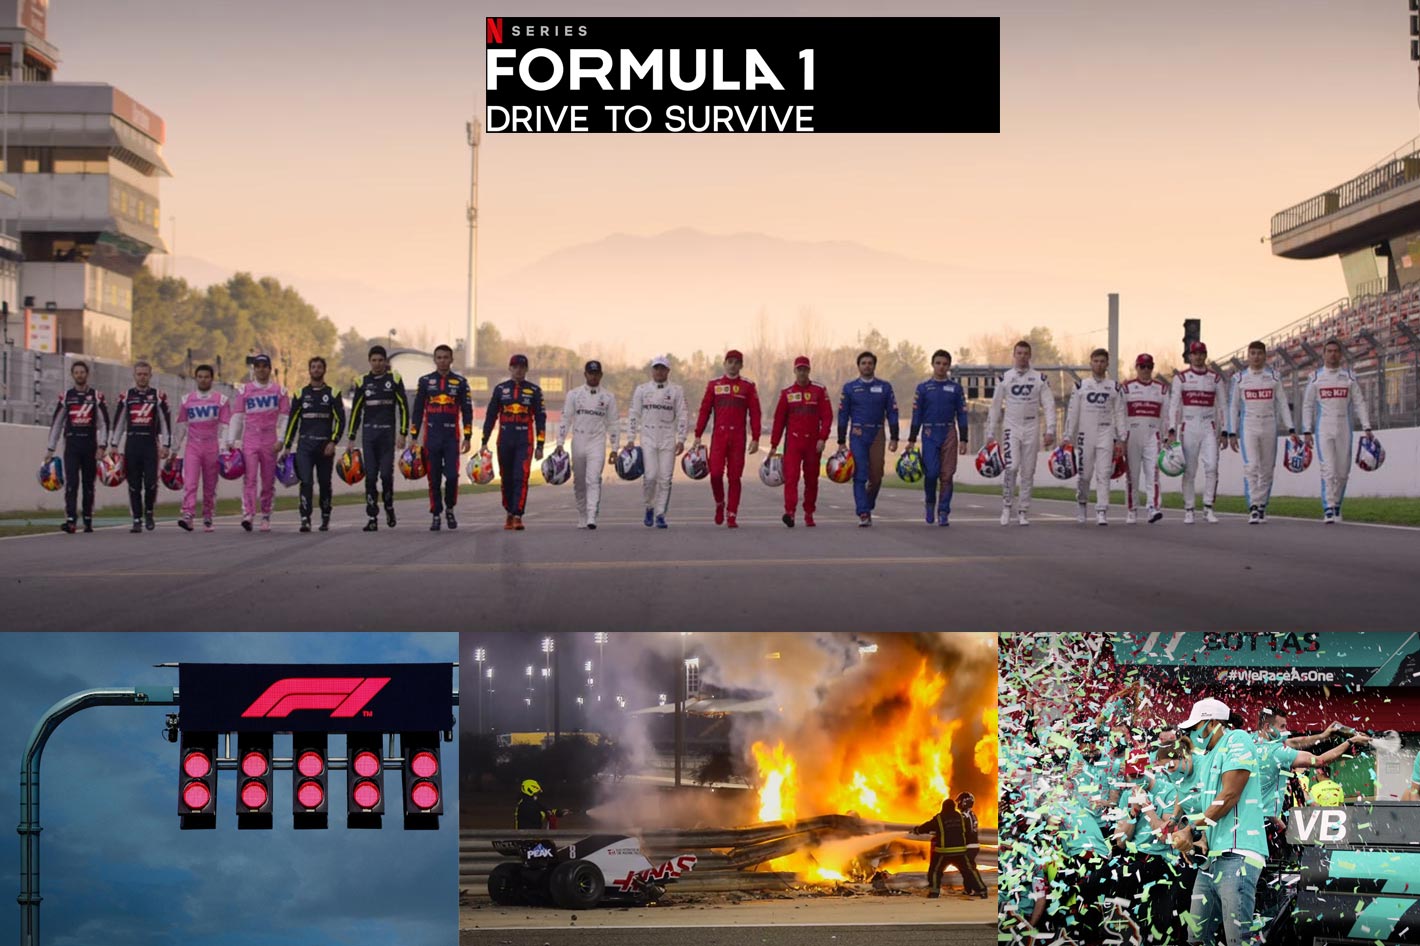 Formula 1 is back, so is Netflix’s documentary Drive to Survive